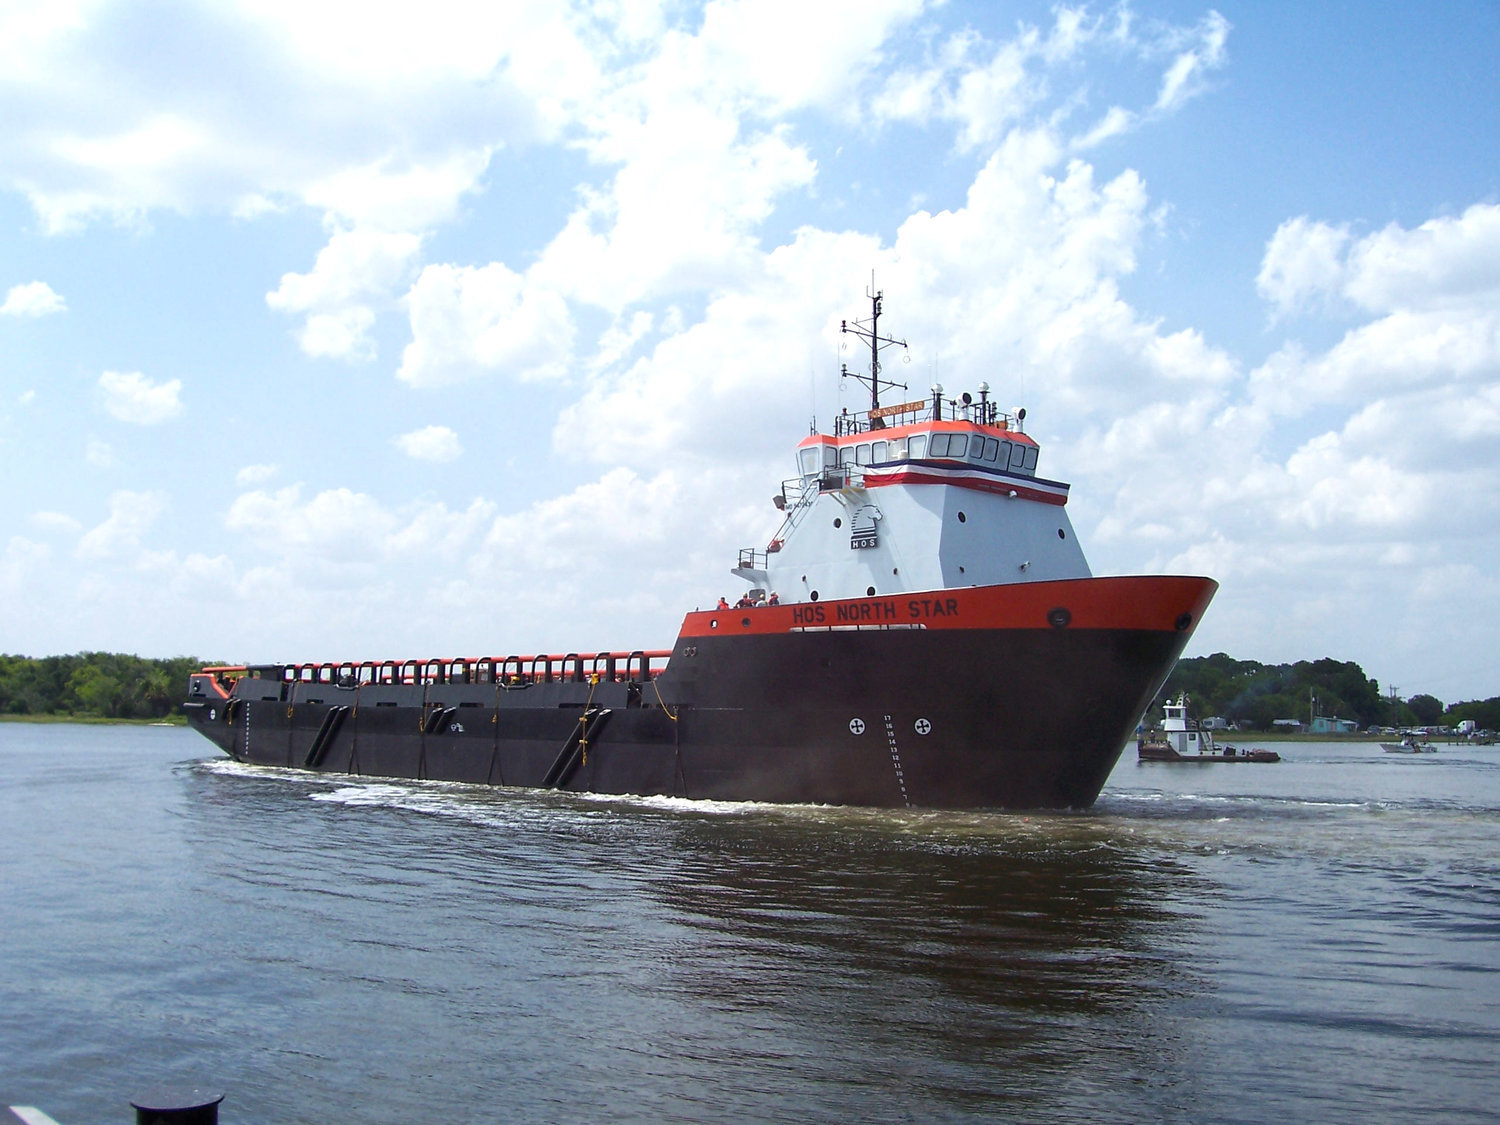 The Steamship Authority purchased the offshore supply vessel North Star and two other identical boats to convert into freight boats.